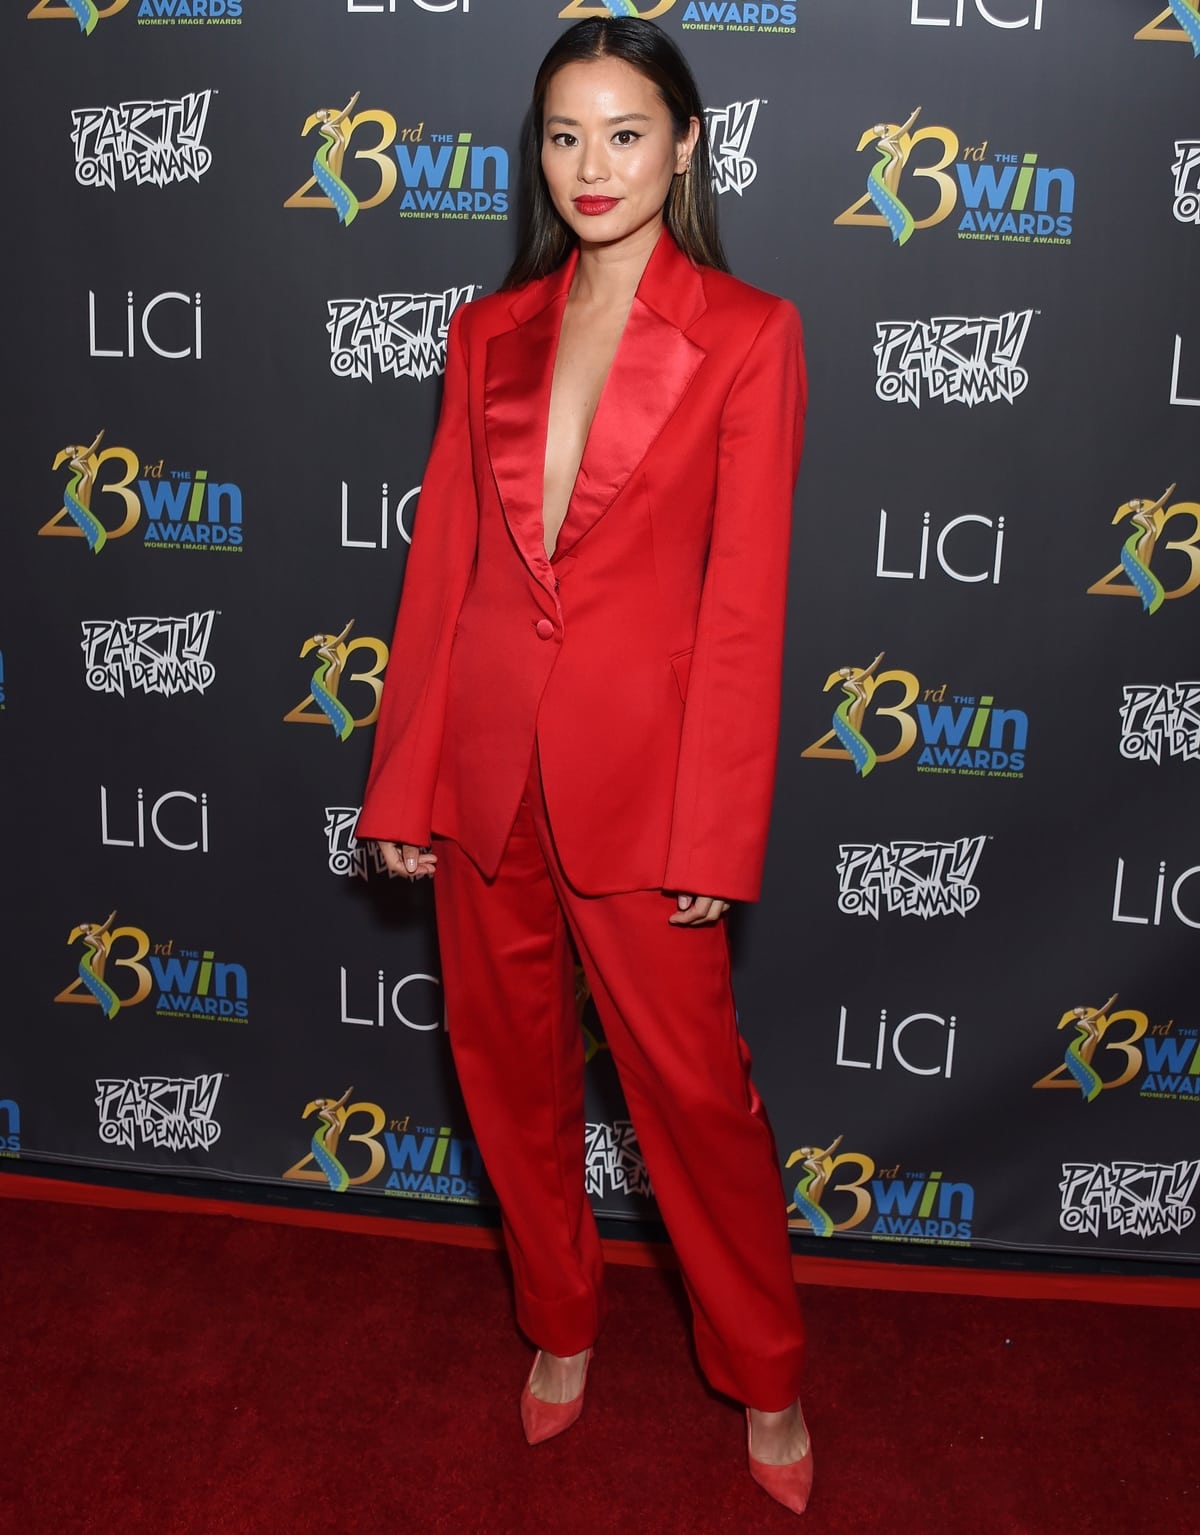 Jamie Chung styled pointy red pumps with a sexy suit jacket and matching pants for the 23rd Women's Images Awards